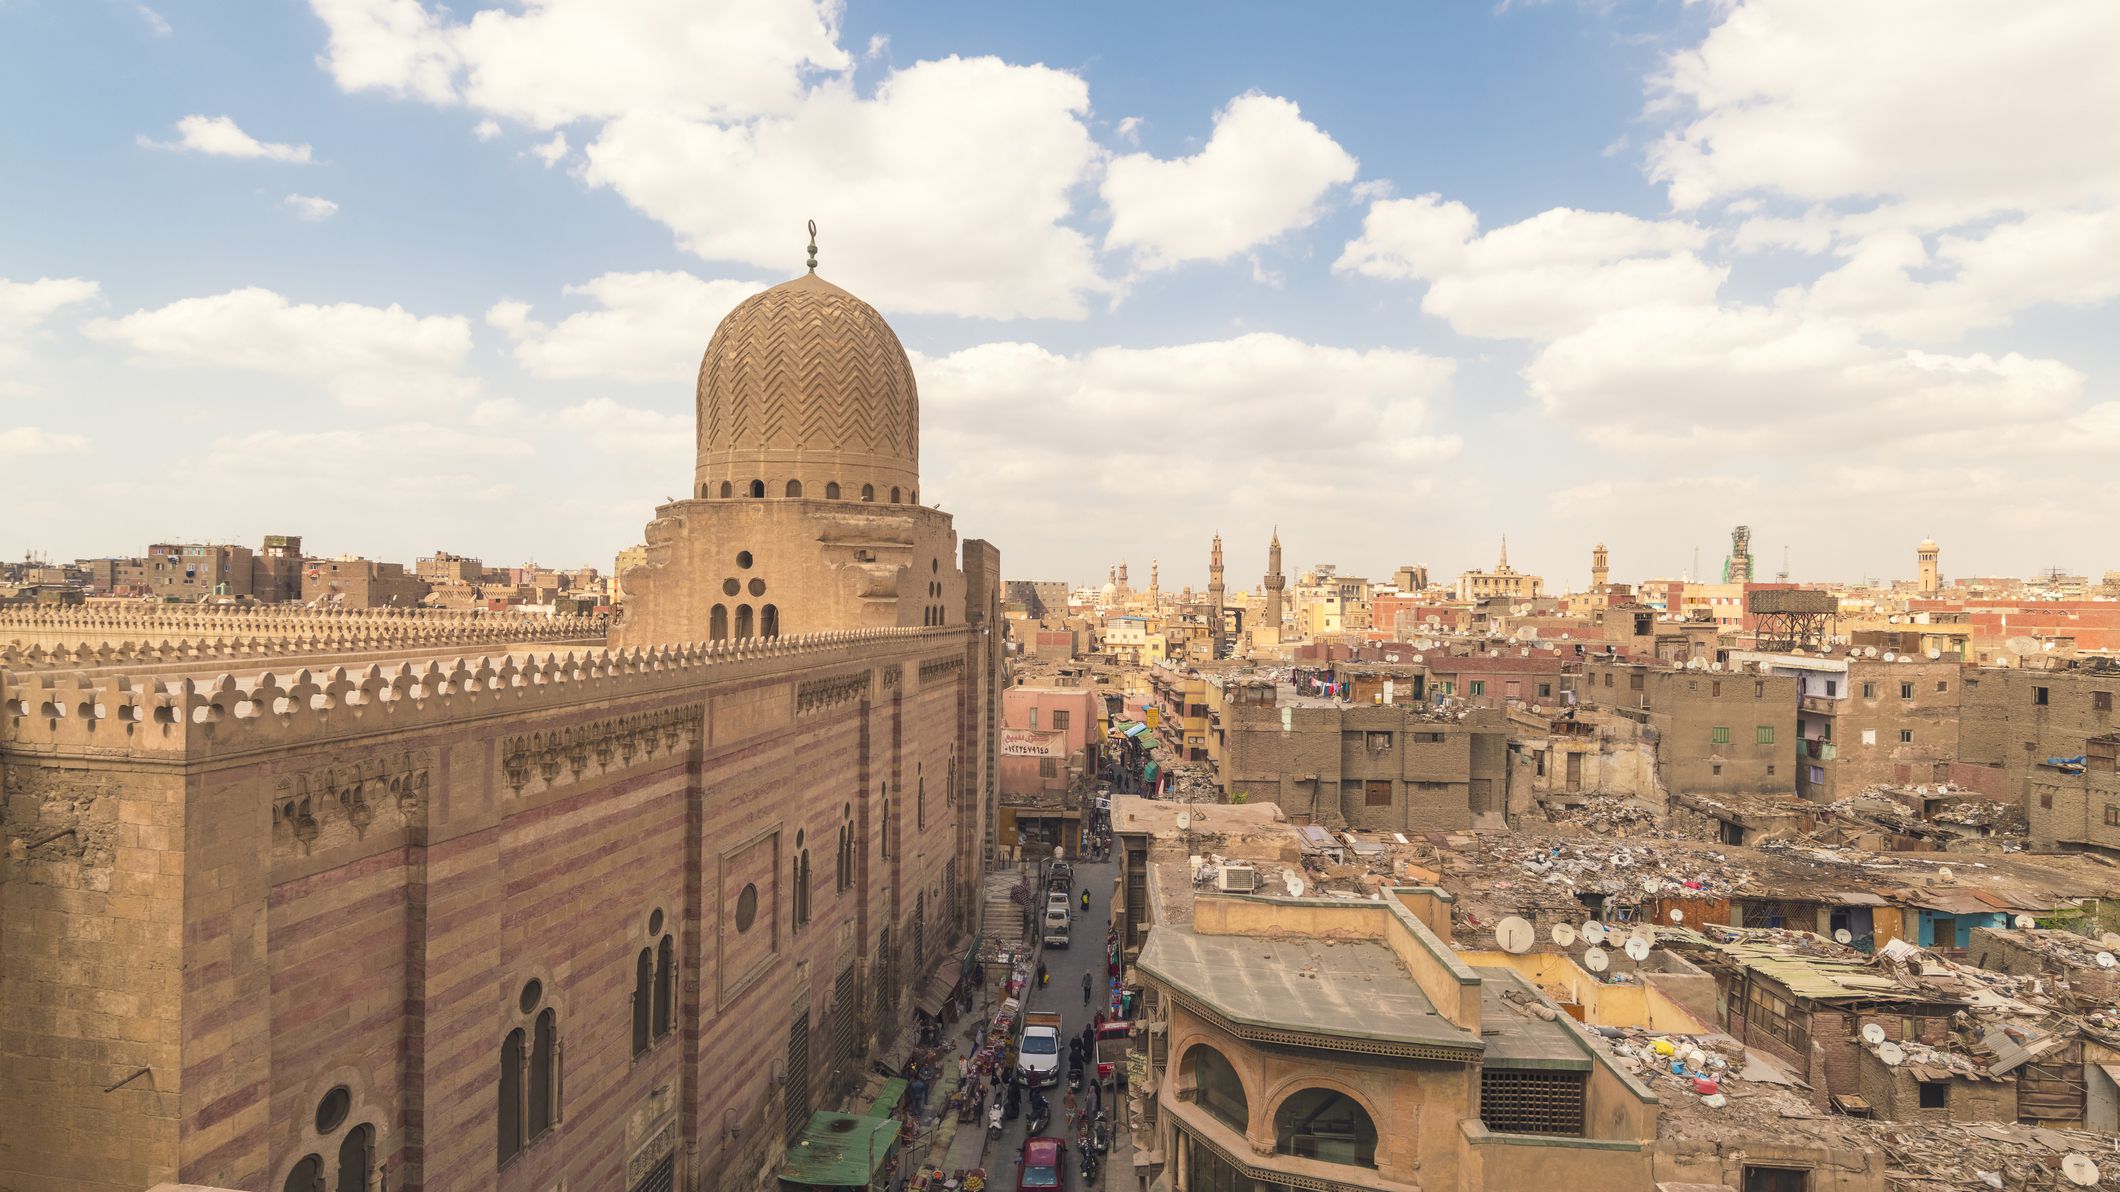 high-angle-view-of-cairo-during-daytime--egypt-940395494-5c572f4246e0fb00013a2bb8.jpg